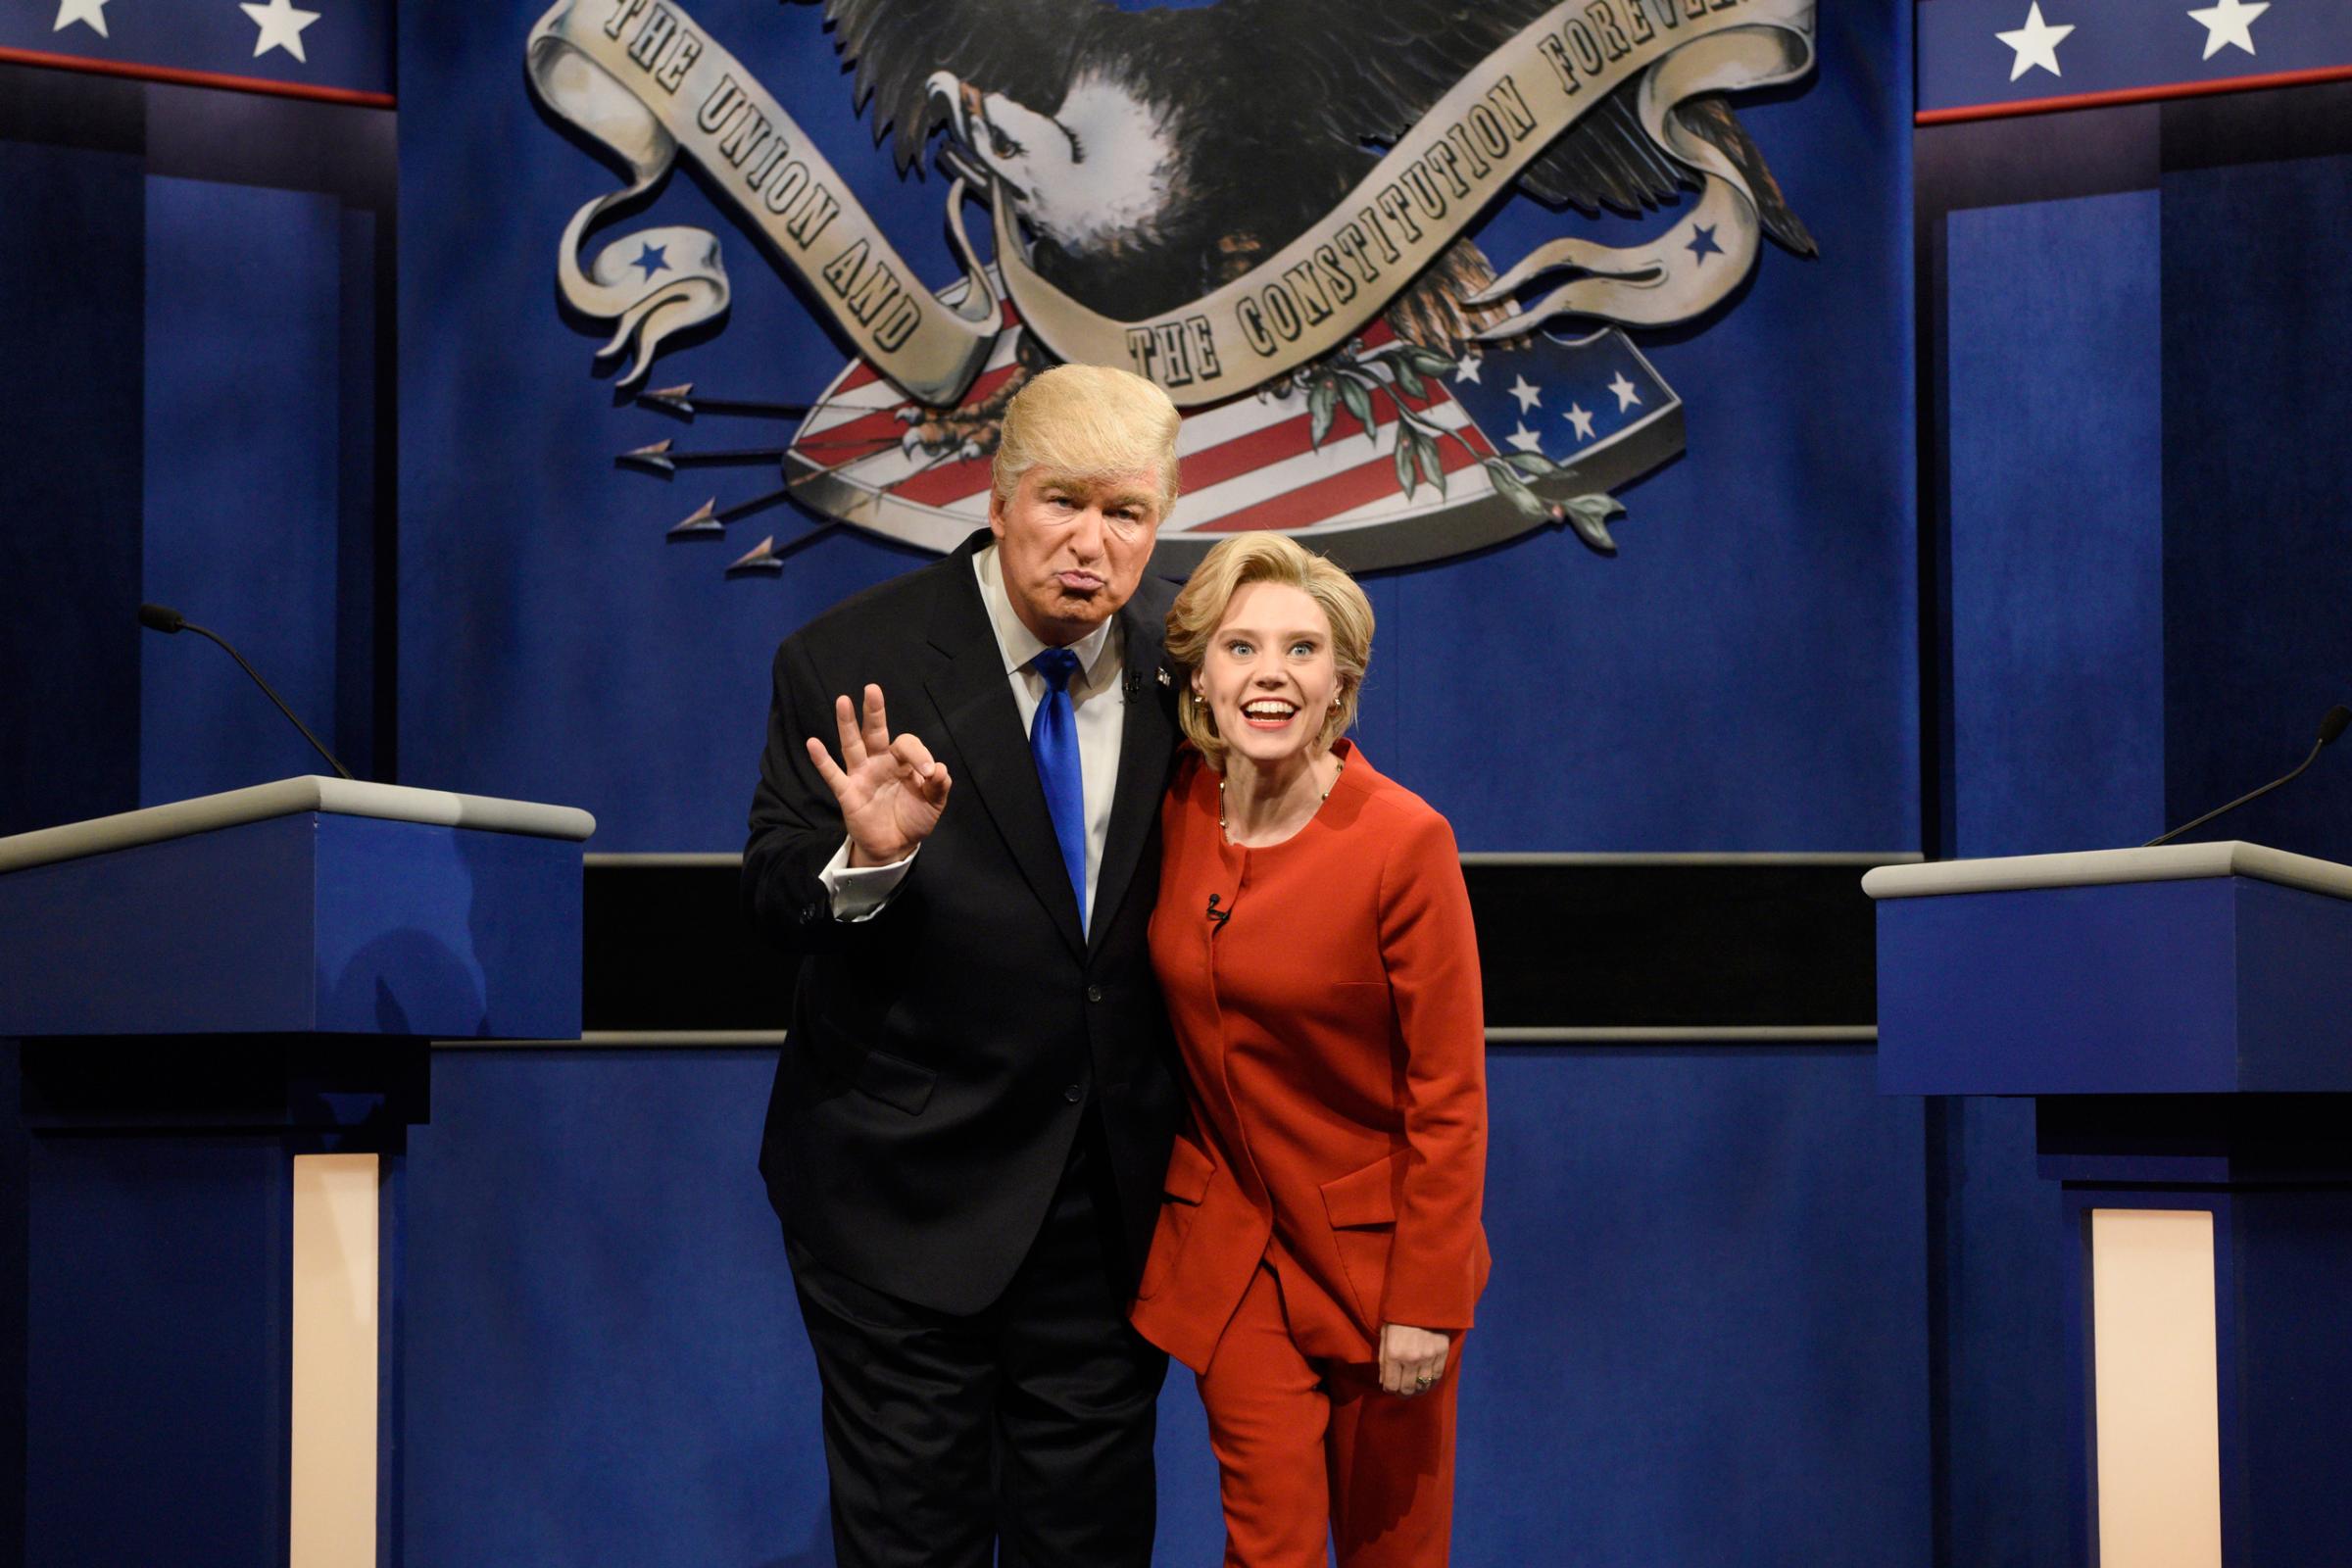 SATURDAY NIGHT LIVE -- "Margot Robbie" Episode 1705 -- Pictured: (l-r) Alec Baldwin as Republican Presidential Candidate Donald Trump and Kate McKinnon as Democratic Presidential Candidate Hillary Clinton during the "Debate Cold Open" sketch on October 1, 2016 -- (Photo by: Will Heath/NBC/NBCU Photo Bank via Getty Images)